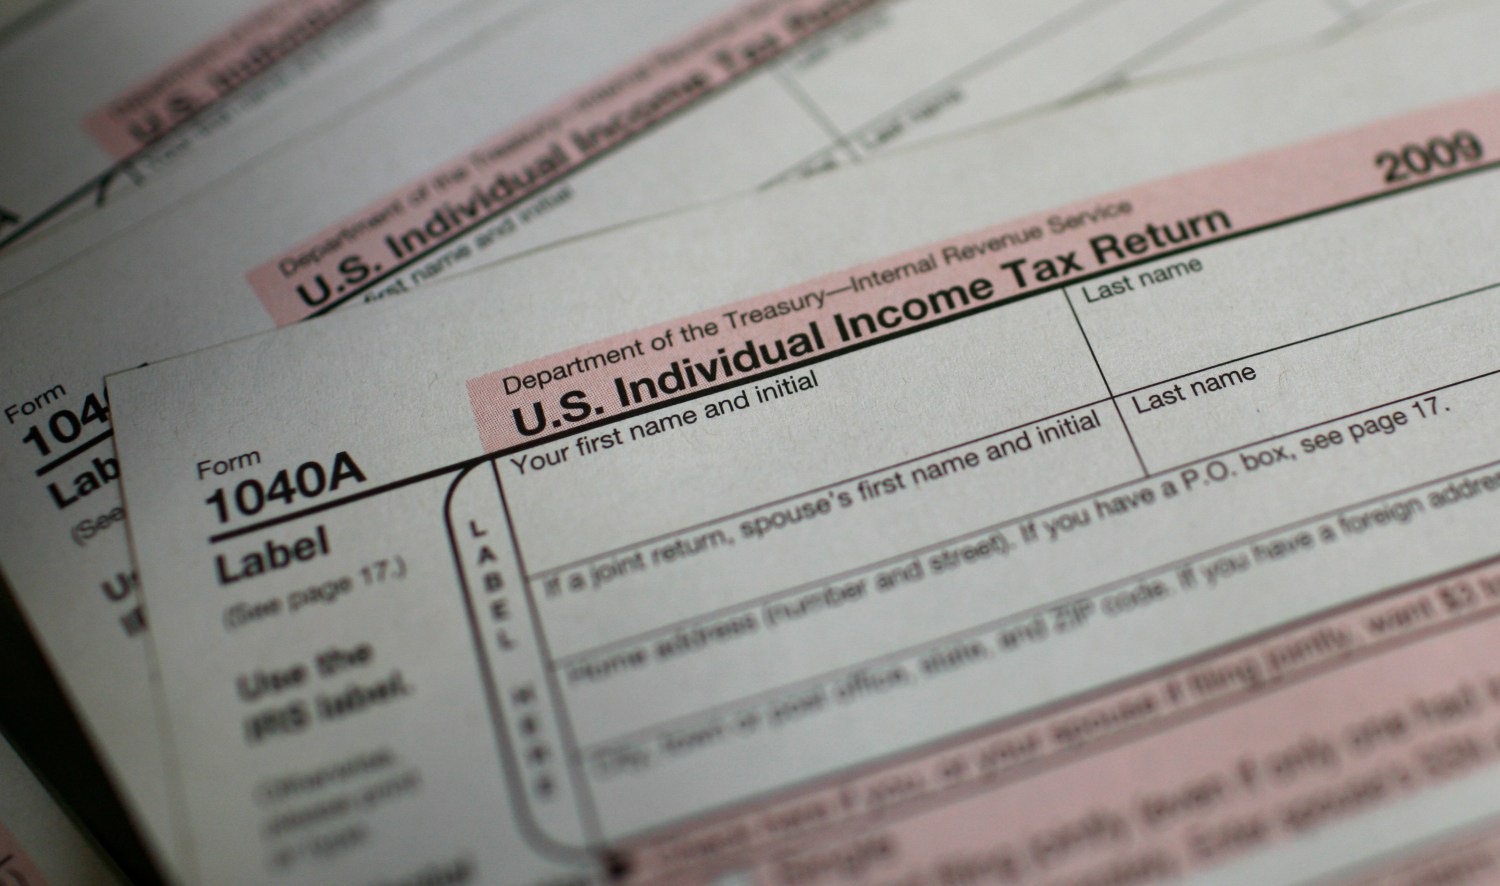 U.S. 1040A Individual Income Tax forms are seen at a U.S. Post office in New York April 15, 2010. April 15 is the deadline for filing taxes in the United States. REUTERS/Mike Segar (UNITED STATES - Tags: BUSINESS) - RTR2CUPG